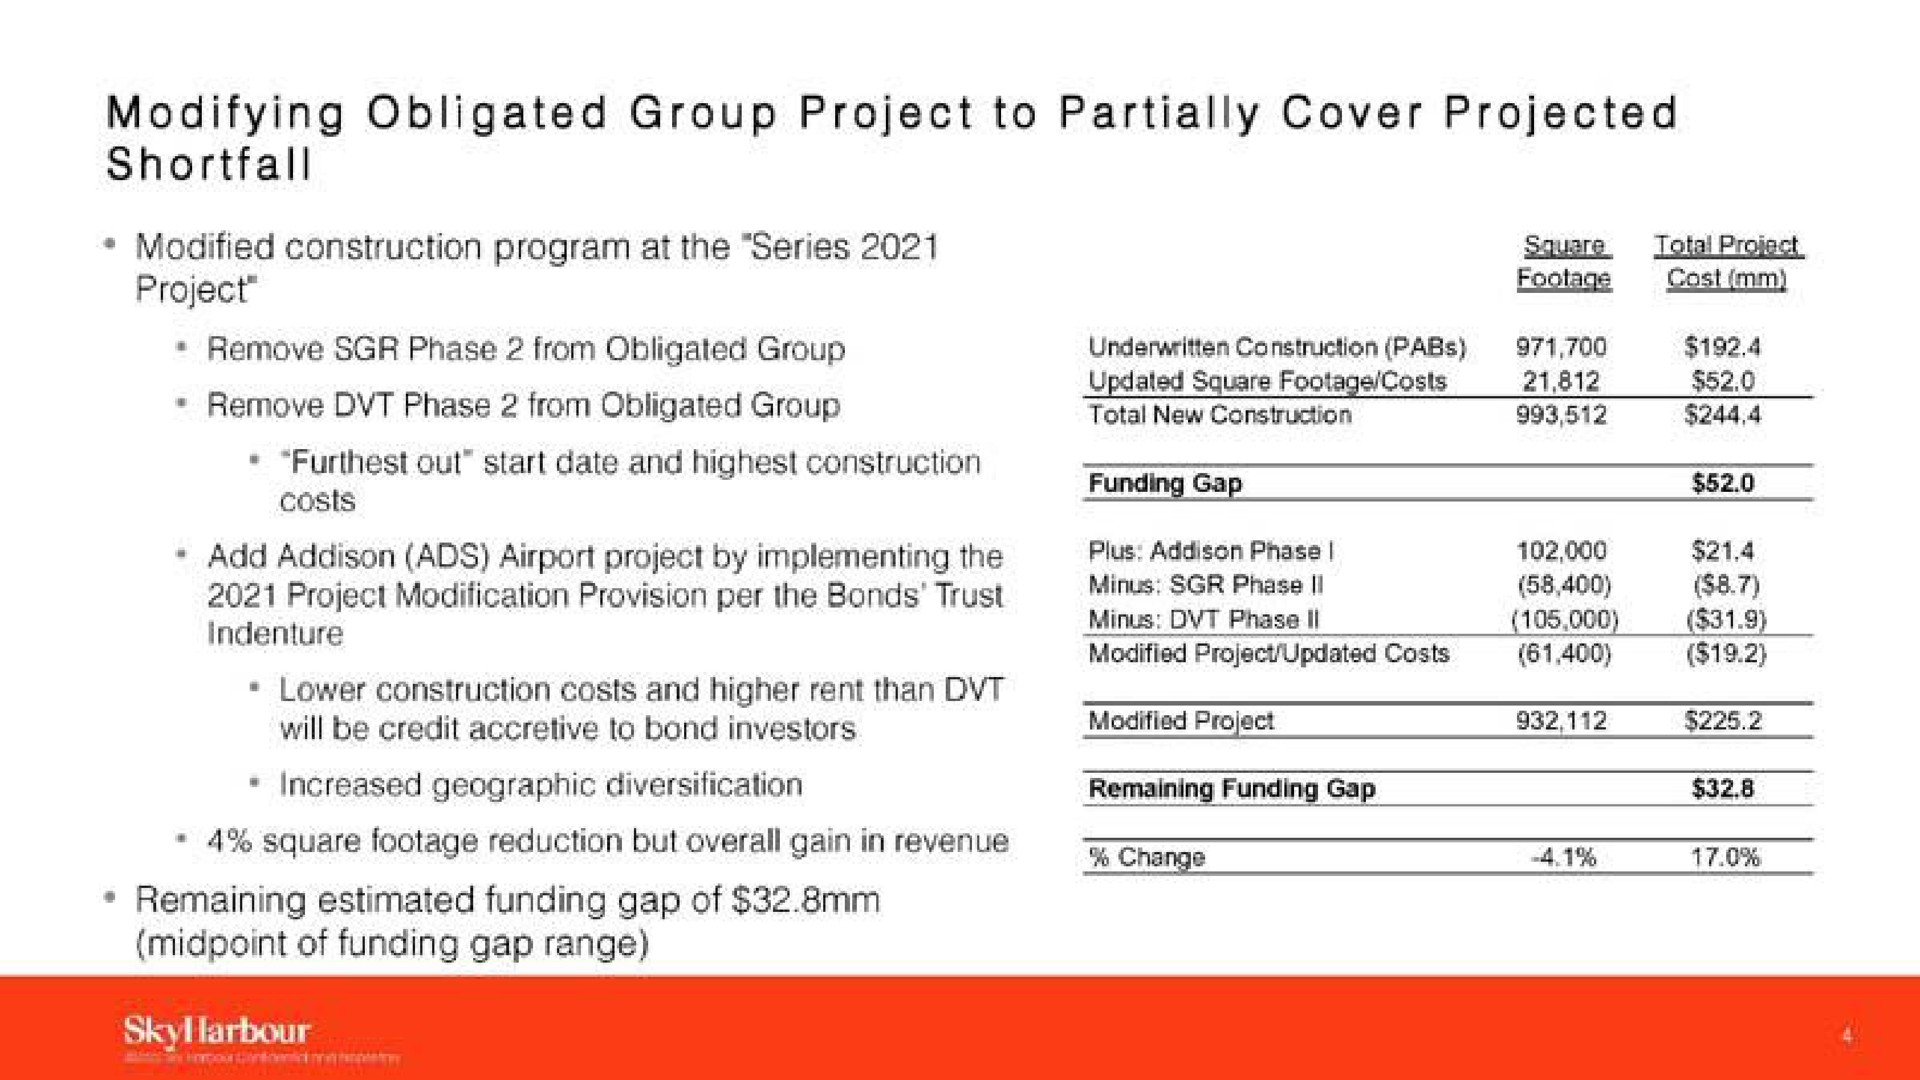 modifying obligated group project to partially cover projected shortfall modified construction program at the series project square footage total project cost remove phase from obligated group furthest out costs start date and highest construction add ads airport project by implementing the project modification provision per the bonds trust lower construction costs and higher rant than will be credit accretive to bond investors underwritten construction plus phase minus phase modified project updated costs modified project remaining estimated funding gap of of funding gap range | SkyHarbour